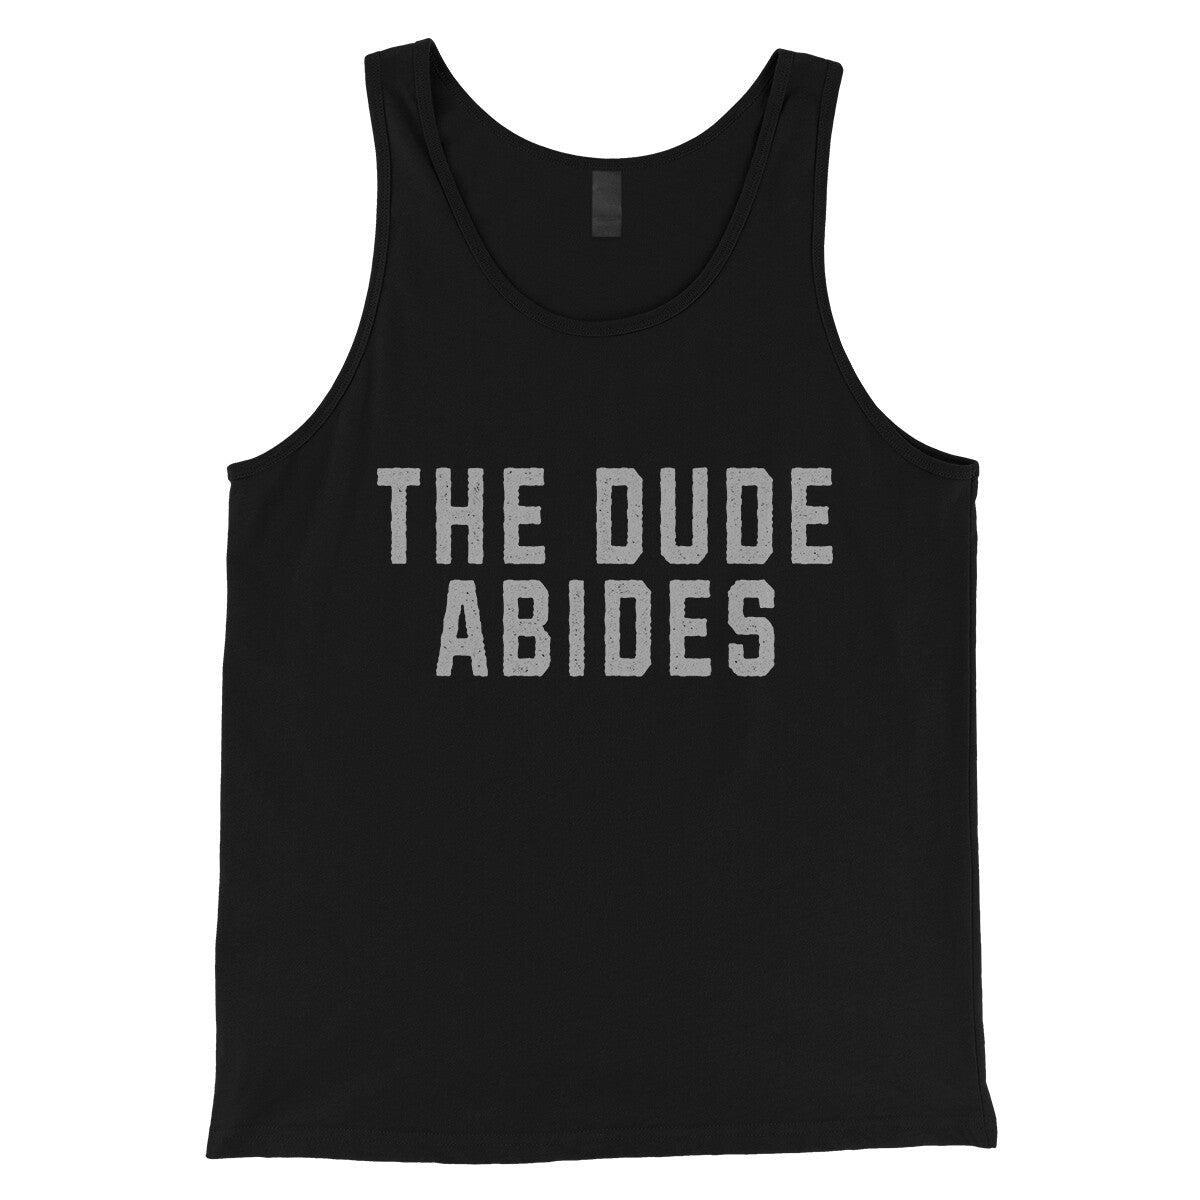 The Dude Abides in Black Color